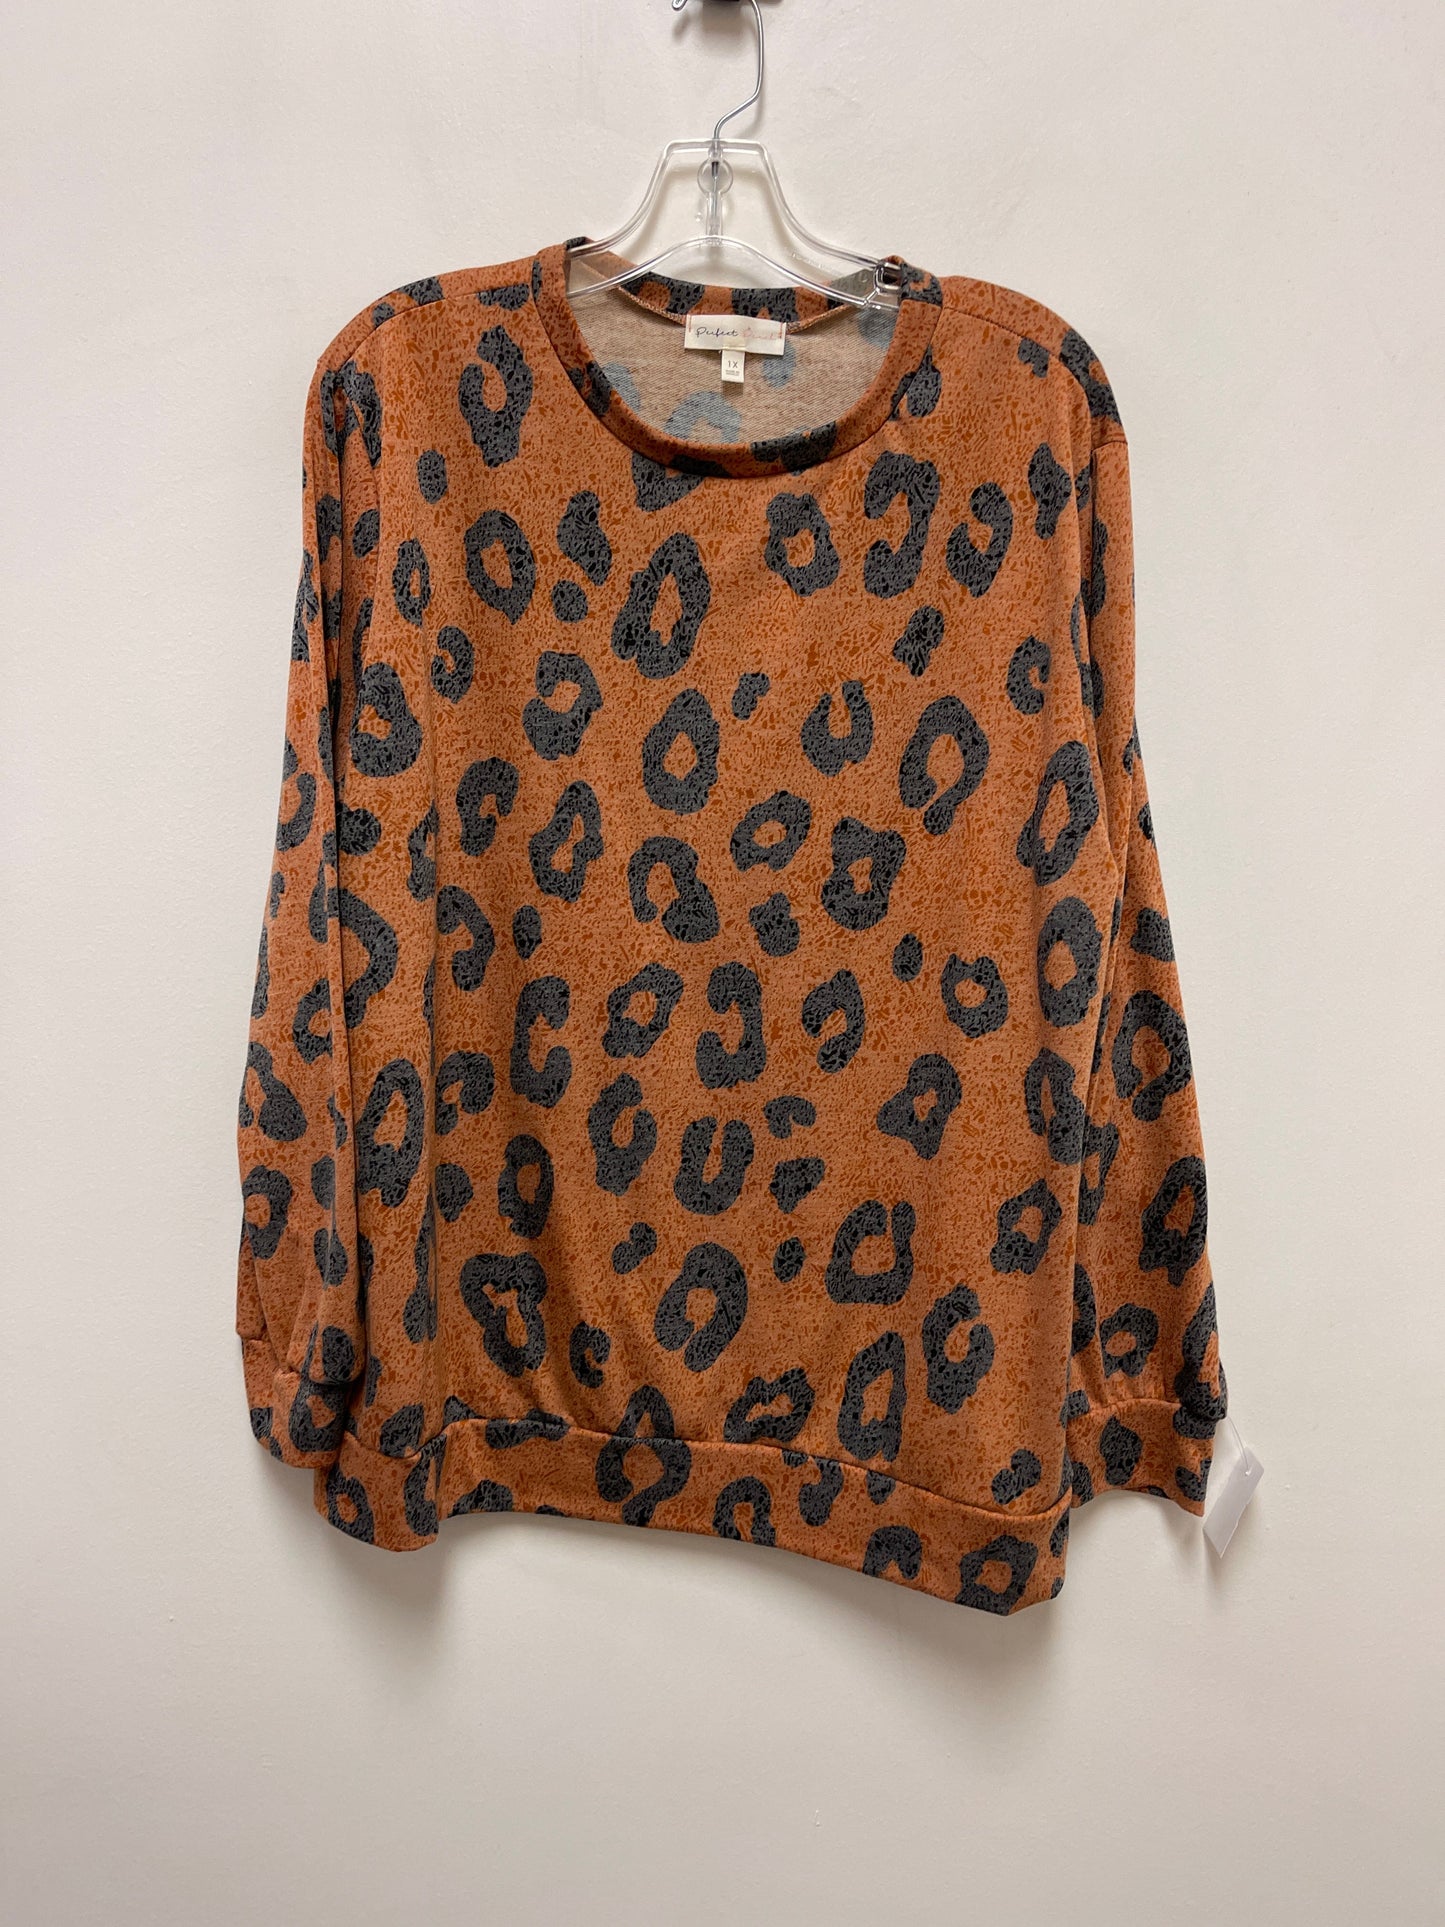 Animal Print Top Long Sleeve Clothes Mentor, Size 1x